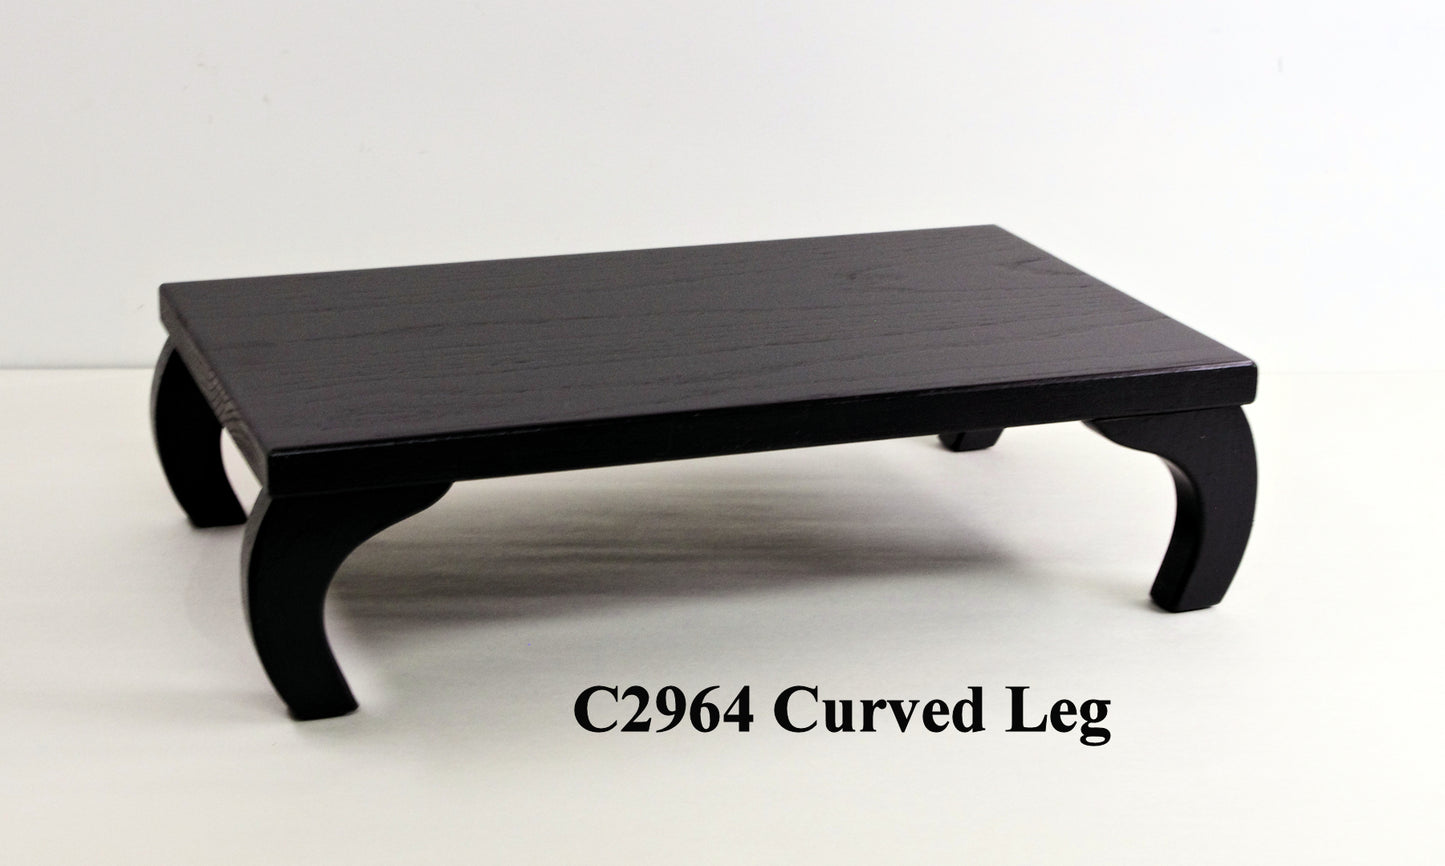 Bonsai Stand Curved Leg C2964 Made to Order 11" Length